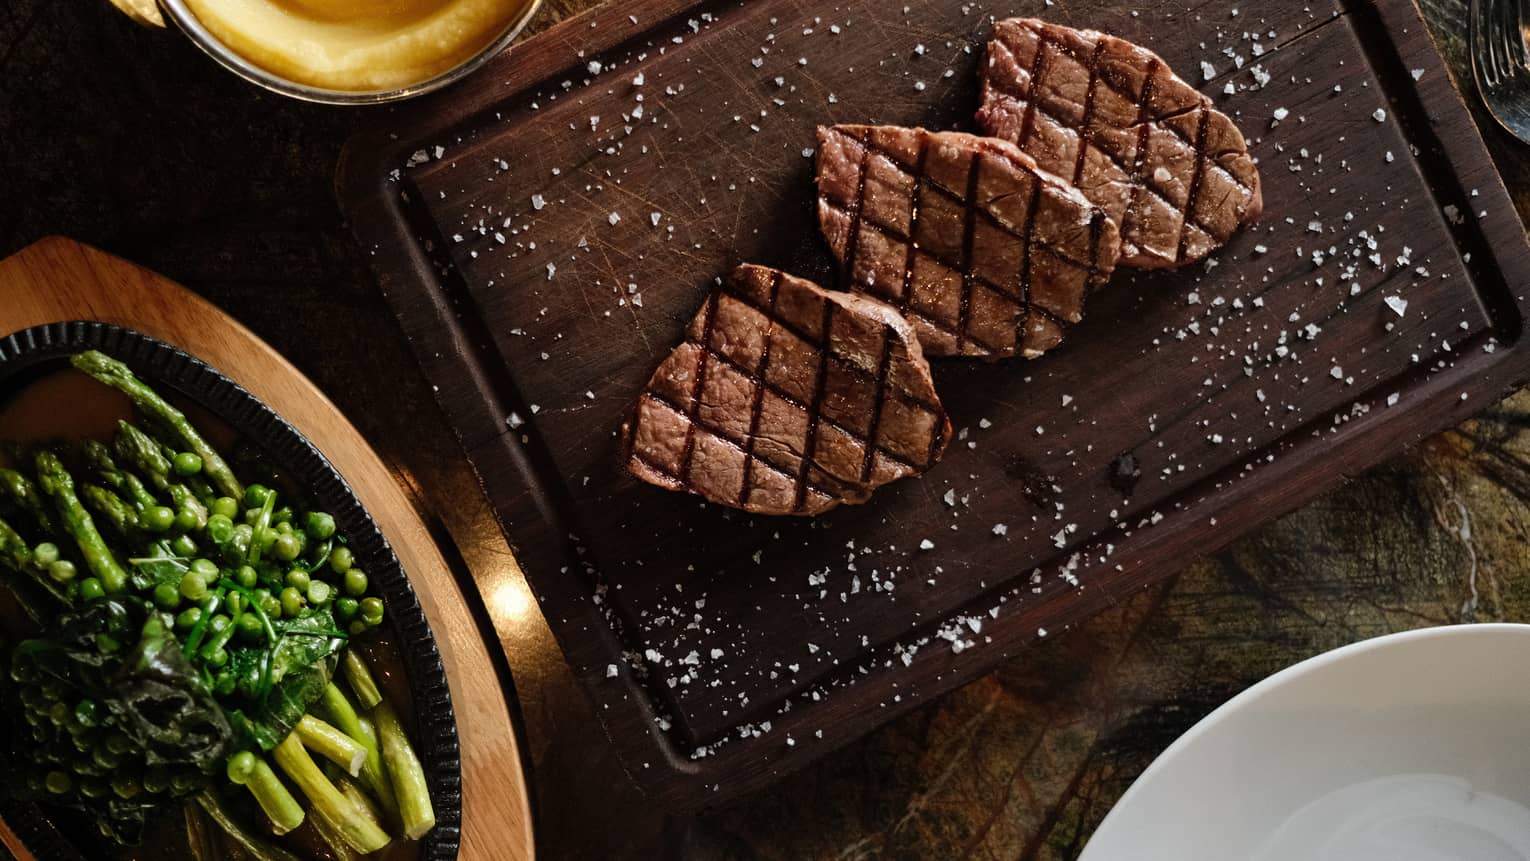 Three pieces of grilled steak on a dark wood cutting board, sprinkled with salt